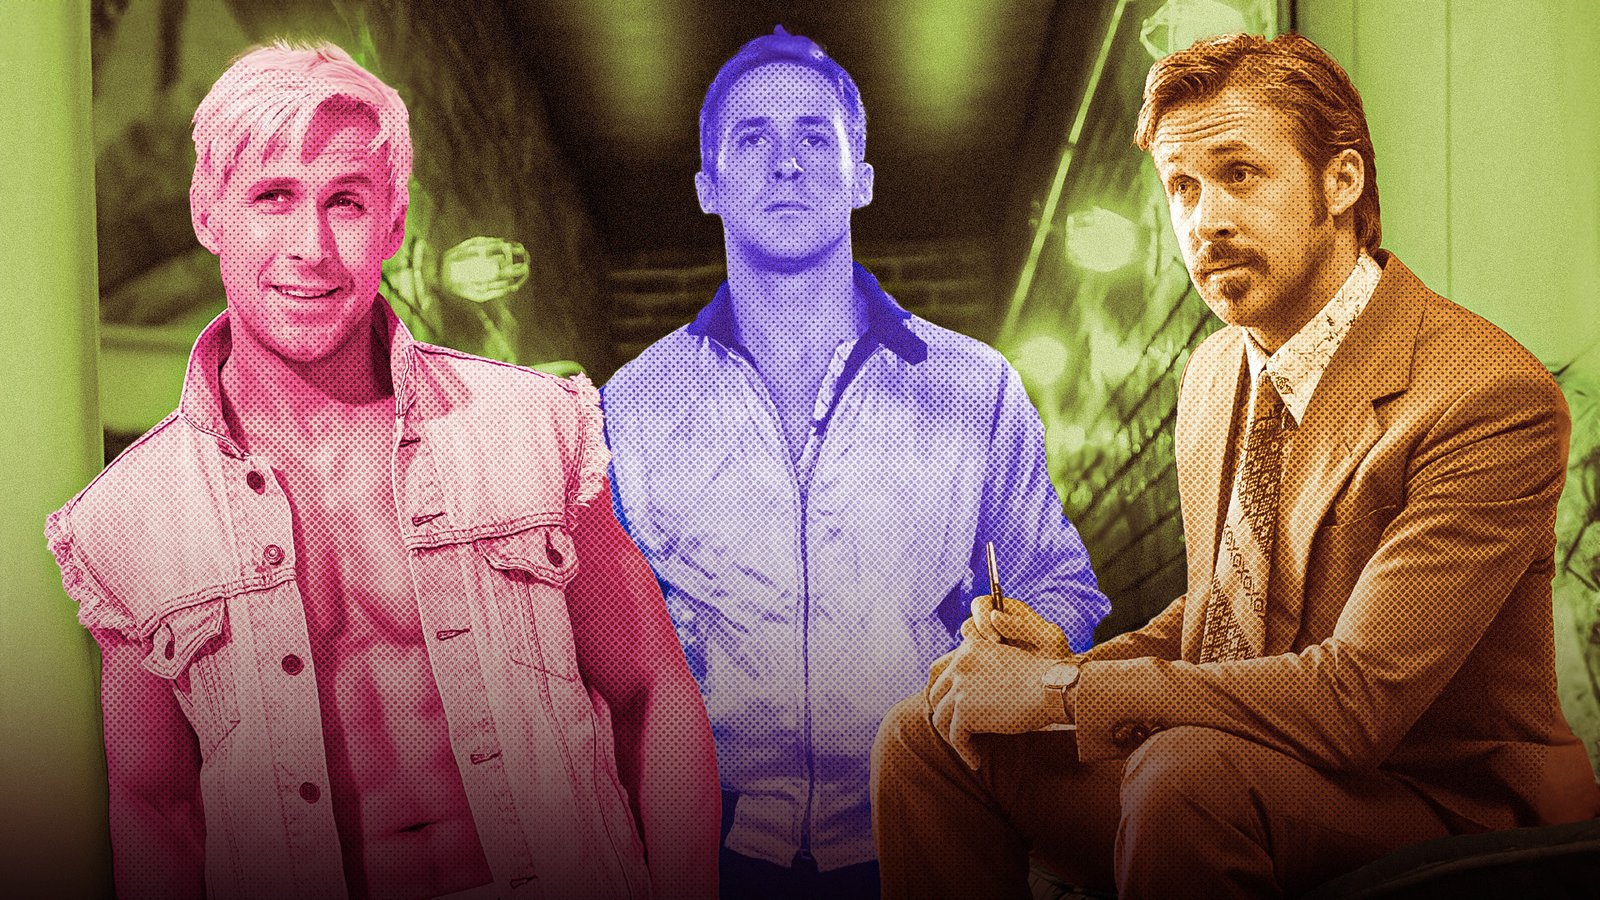 The Fall Guy' Looks Like The Dream Ryan Gosling Action-Comedy Movie The  World Deserves